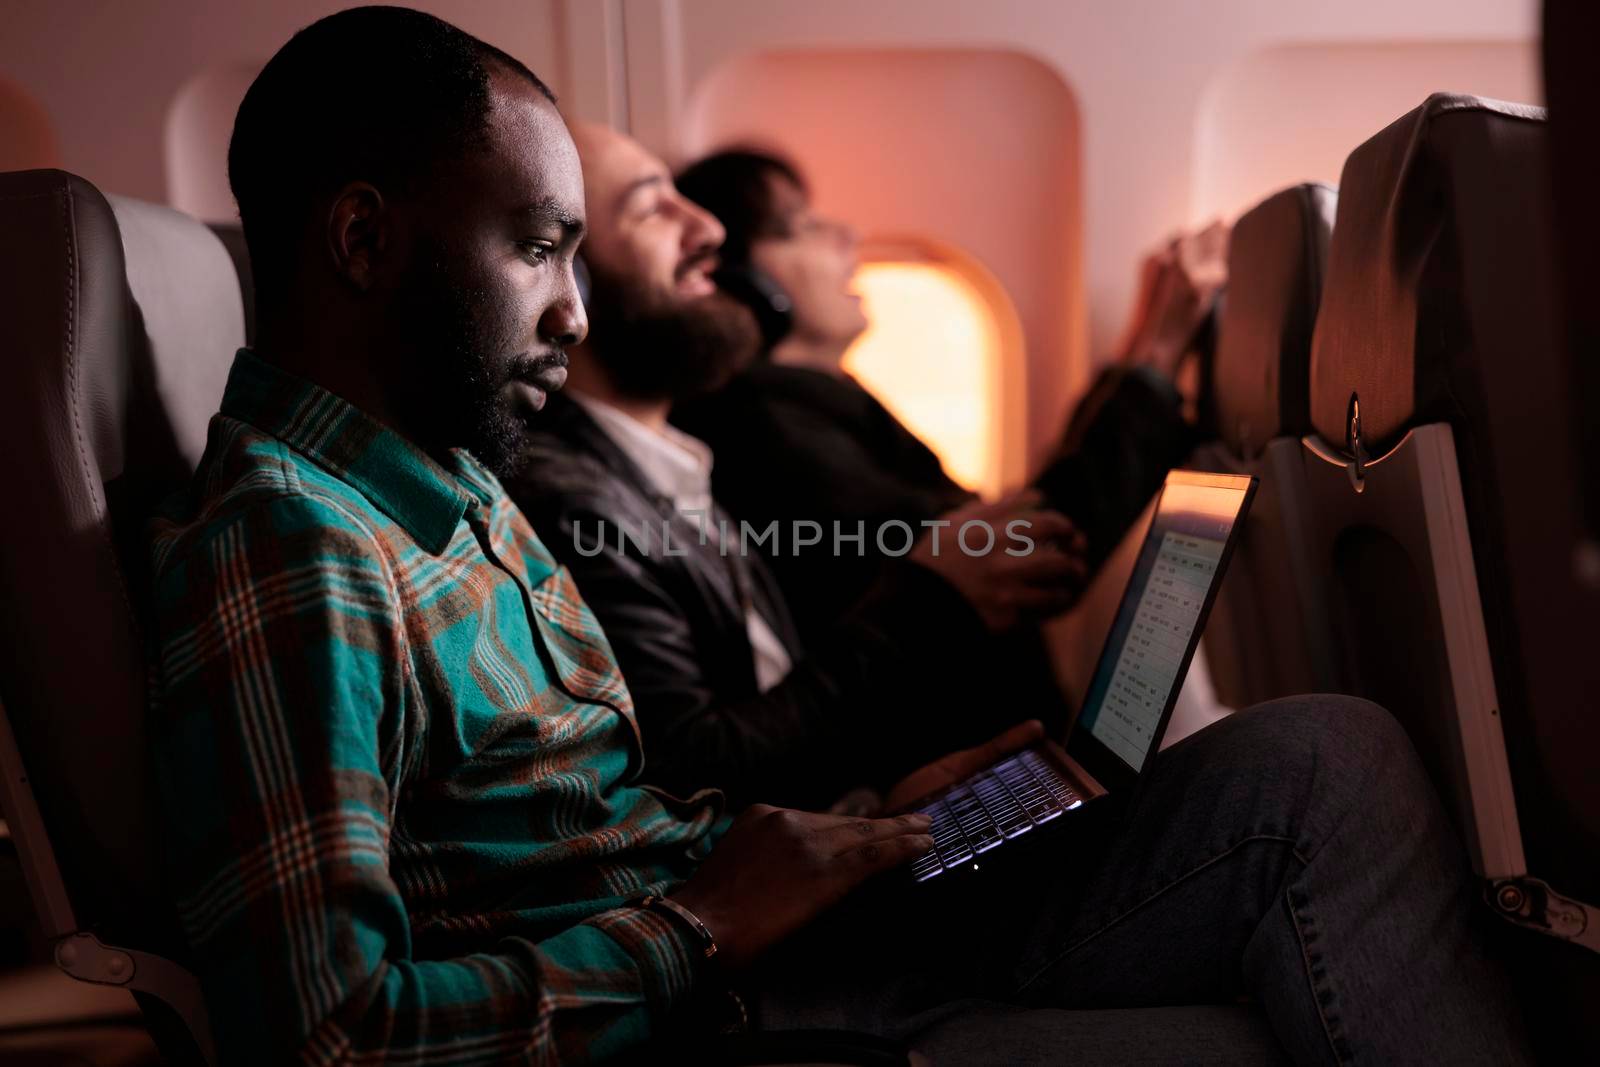 African american man travelling abroad by airplane on international flight, using airline service and aerial transportation. Freelancer using laptop computer during sunset in economy class.